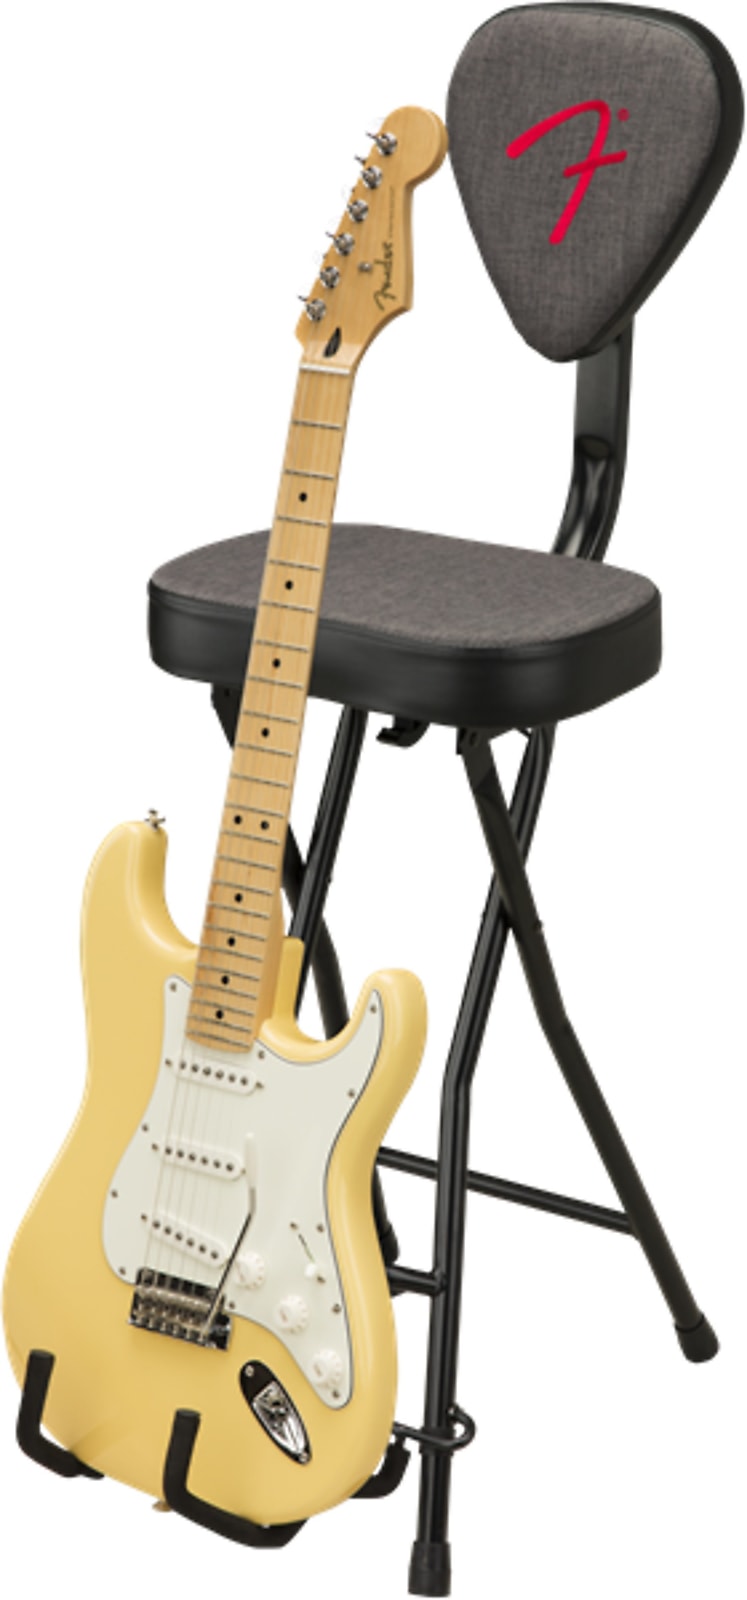 Fender 351 Seat/Stand Combo